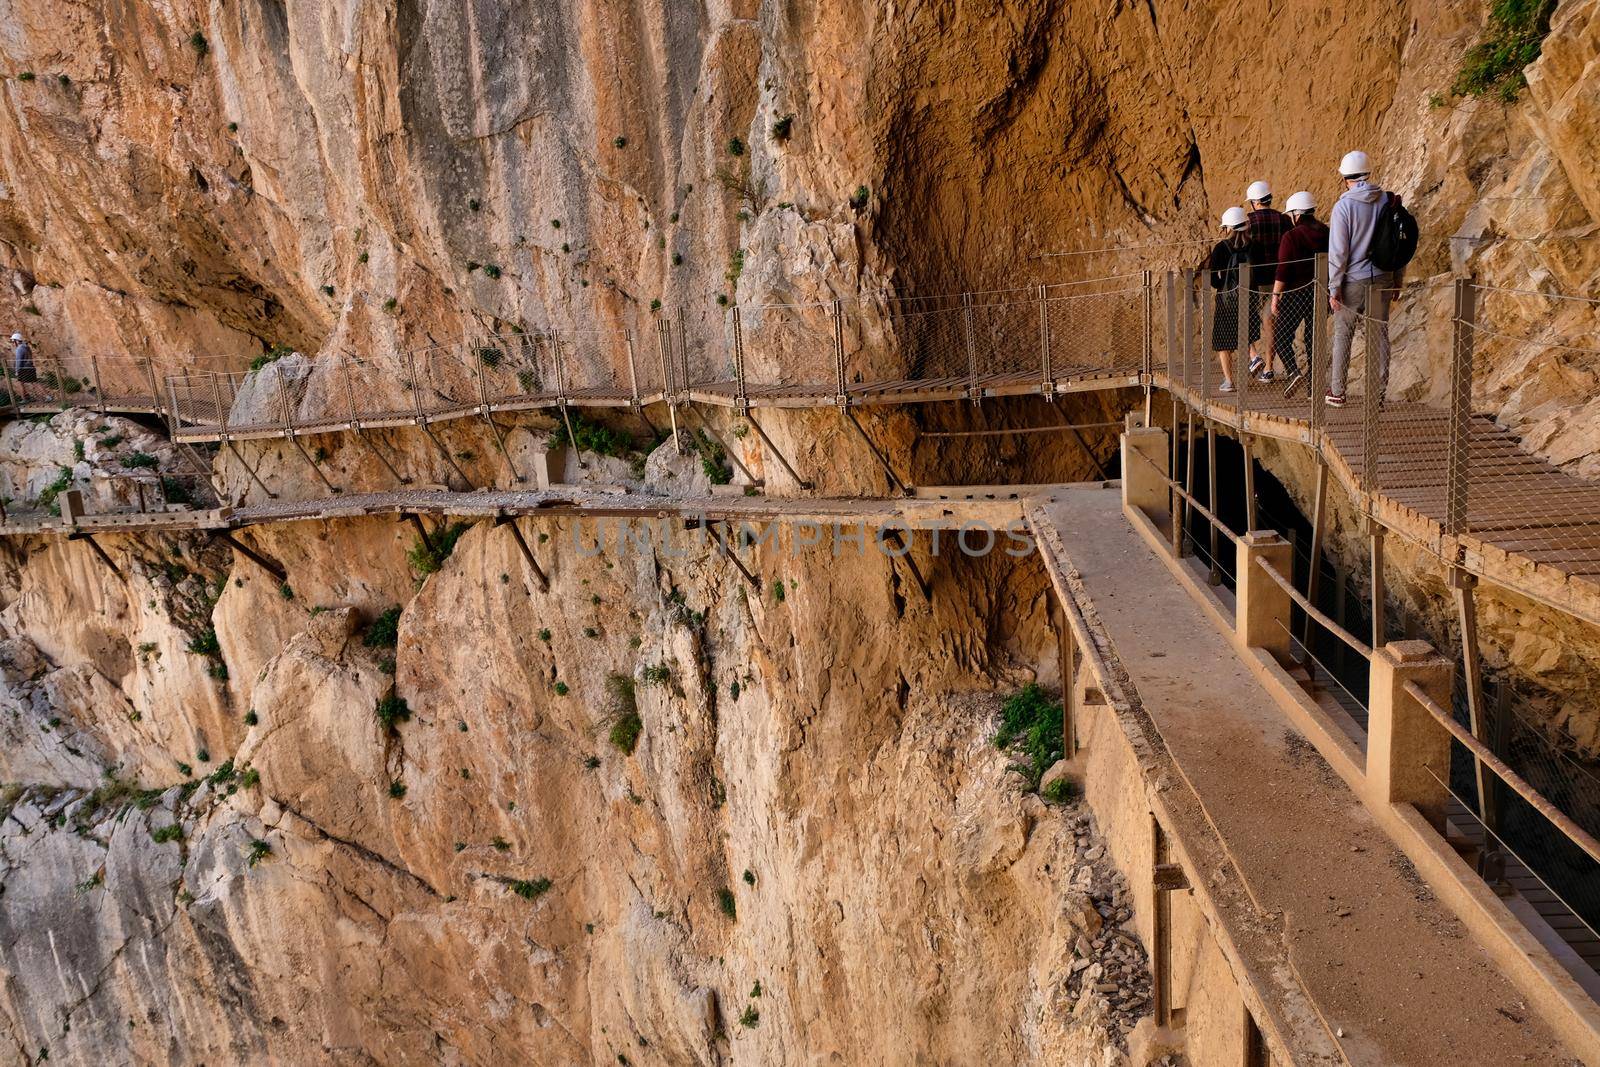 People in the Caminito del Rey gorge by JCVSTOCK